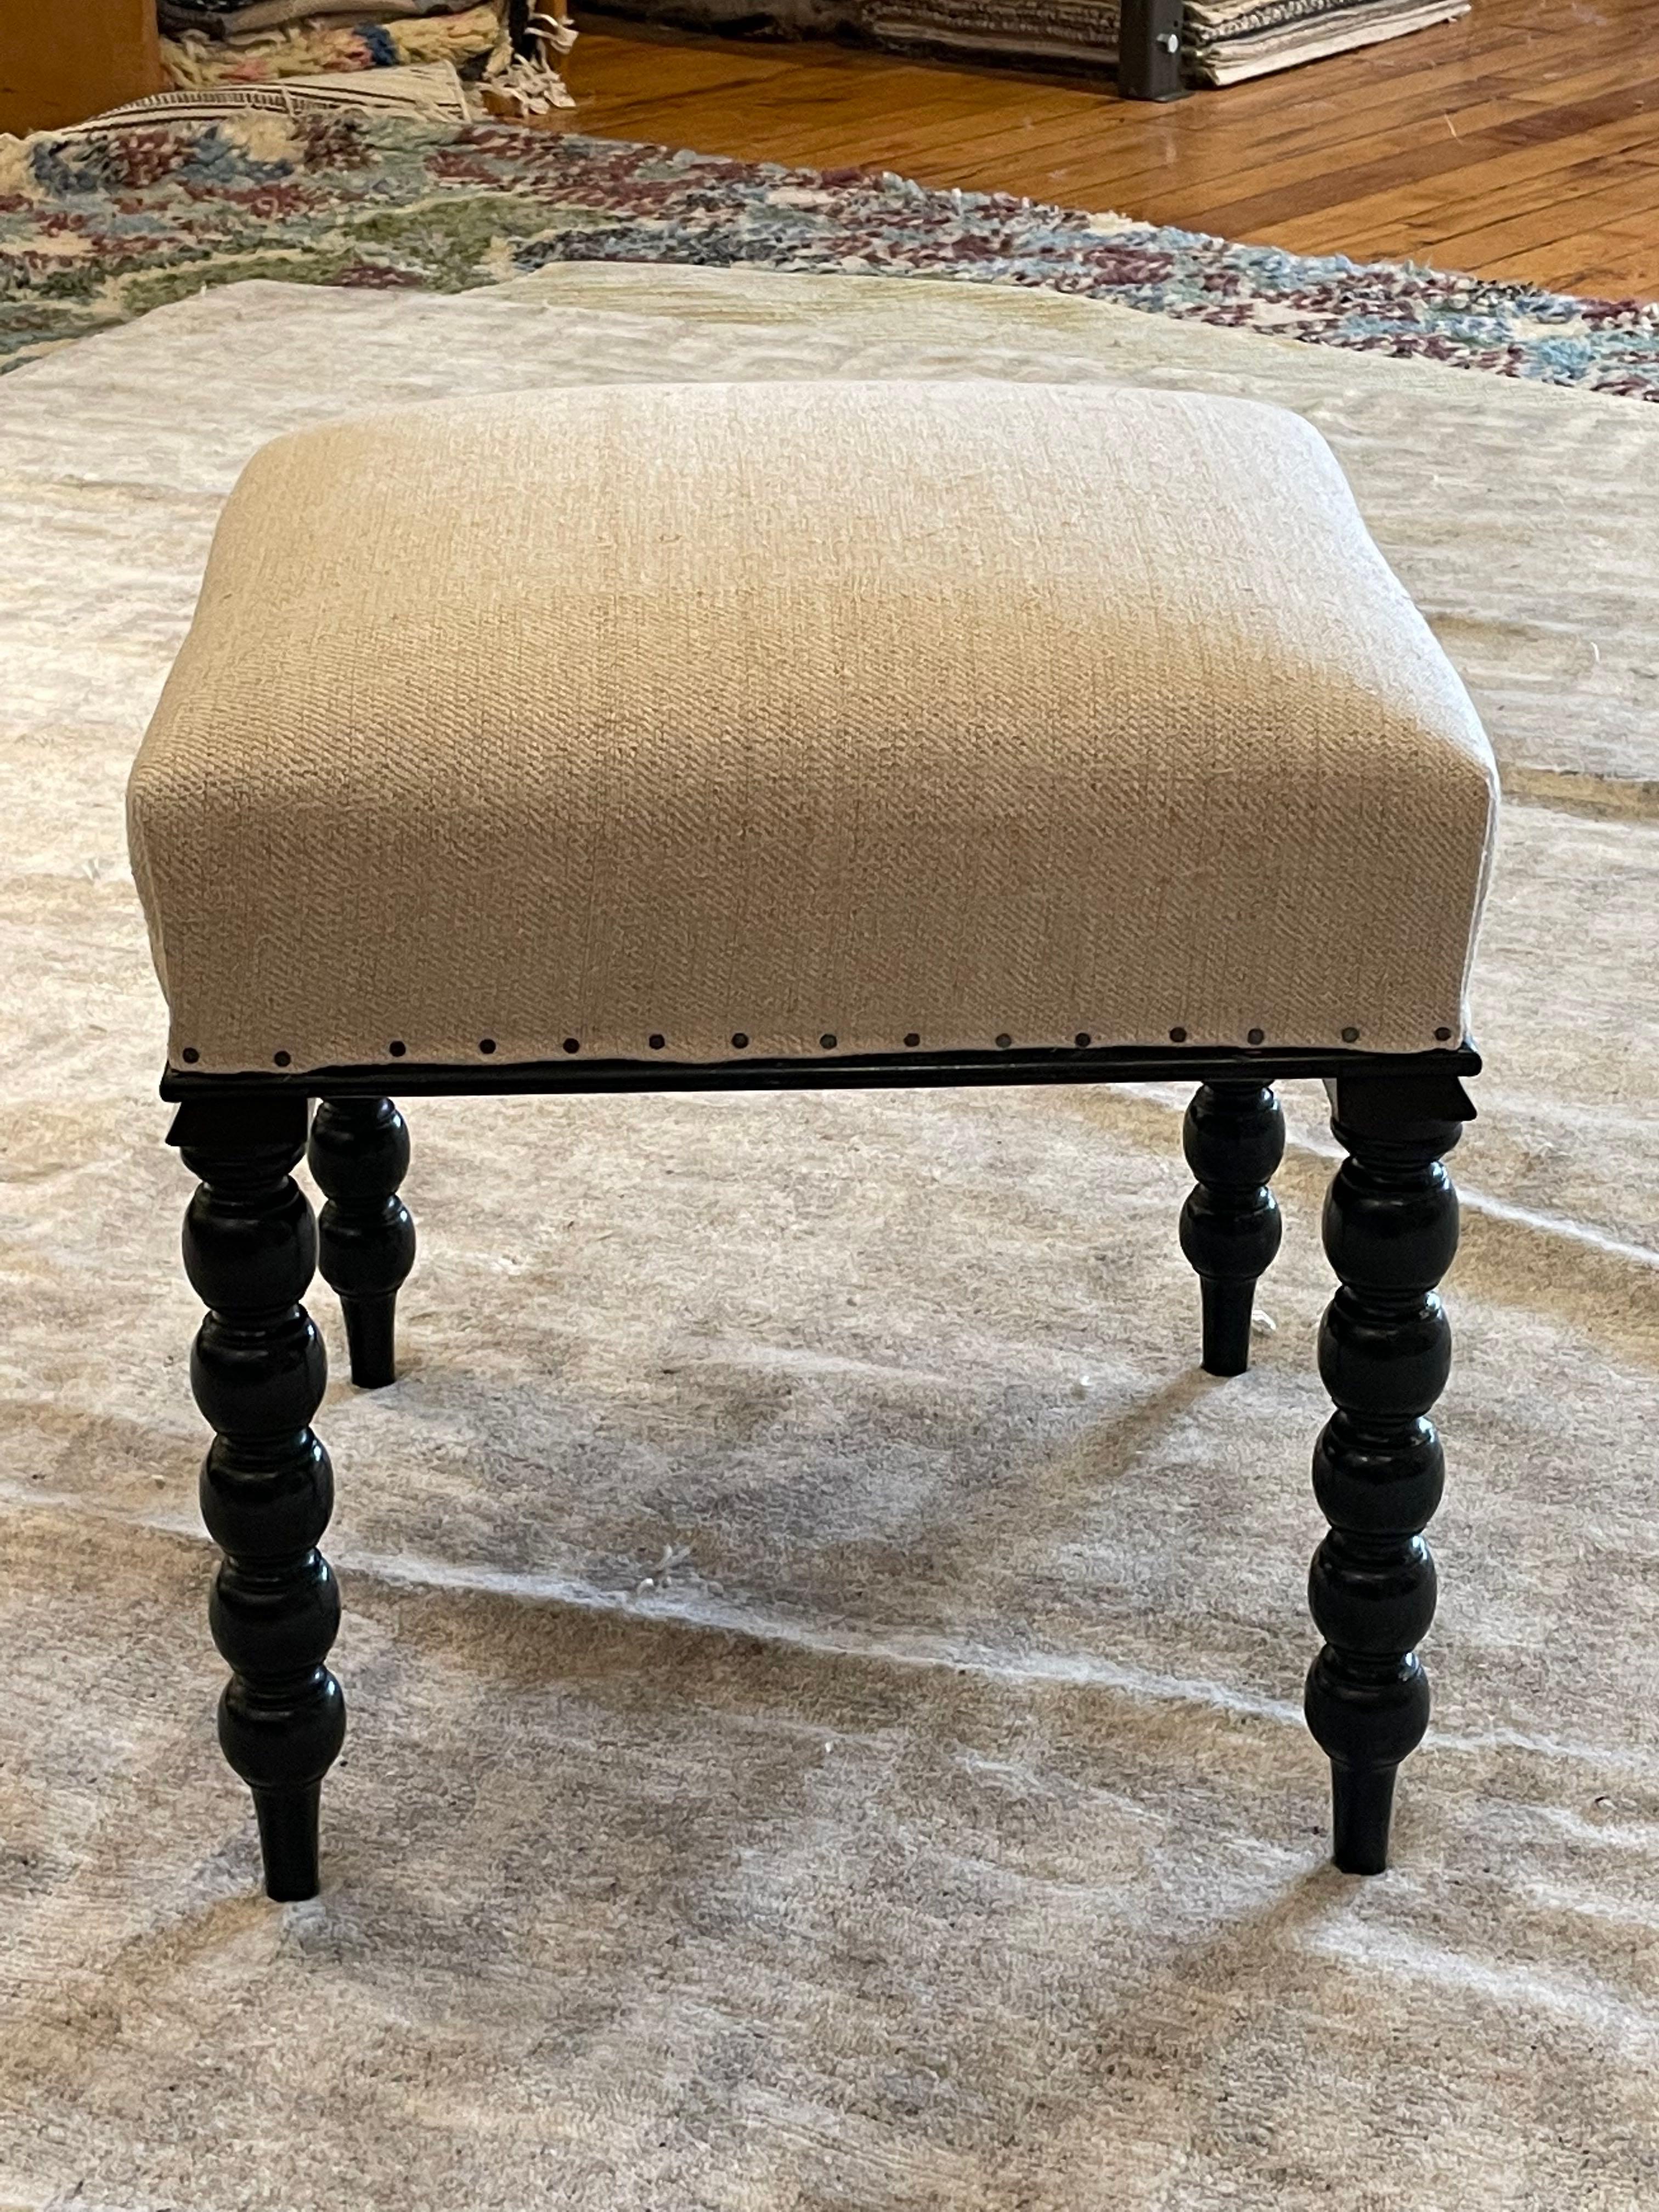 1870c English ebonized square shaped foot stool.
Four bobbin turned legs, finished on a raised turned toe.
Recently reupholstered in vintage hand spun Belgian linen.